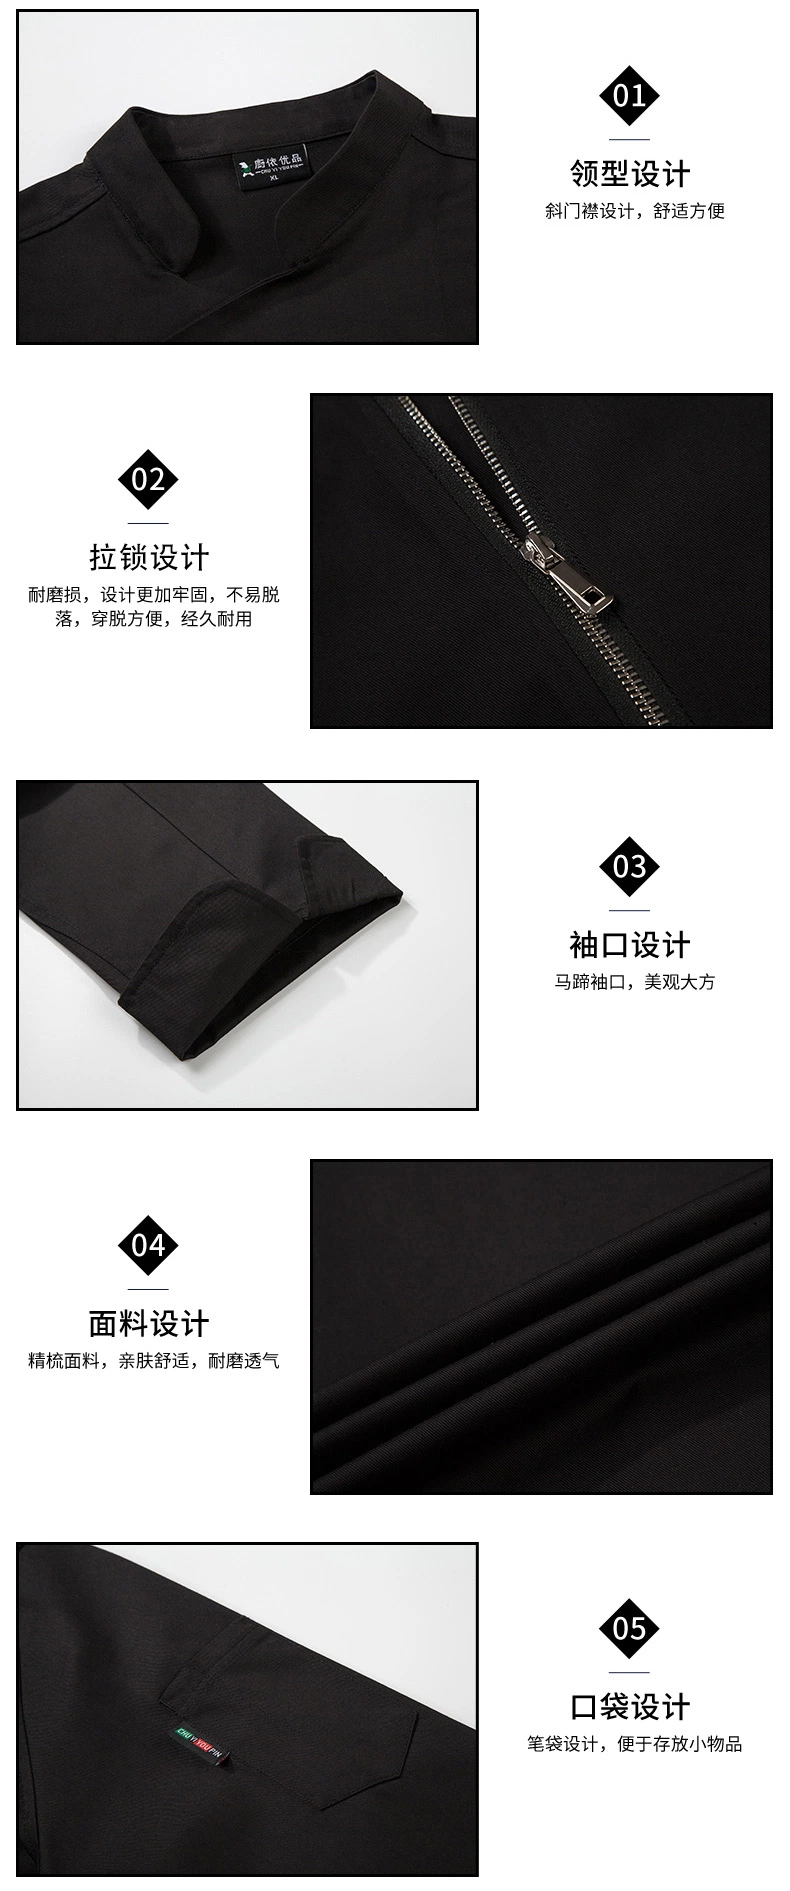 High Quality Black Long Sleeve Master Cook Work Uniforms